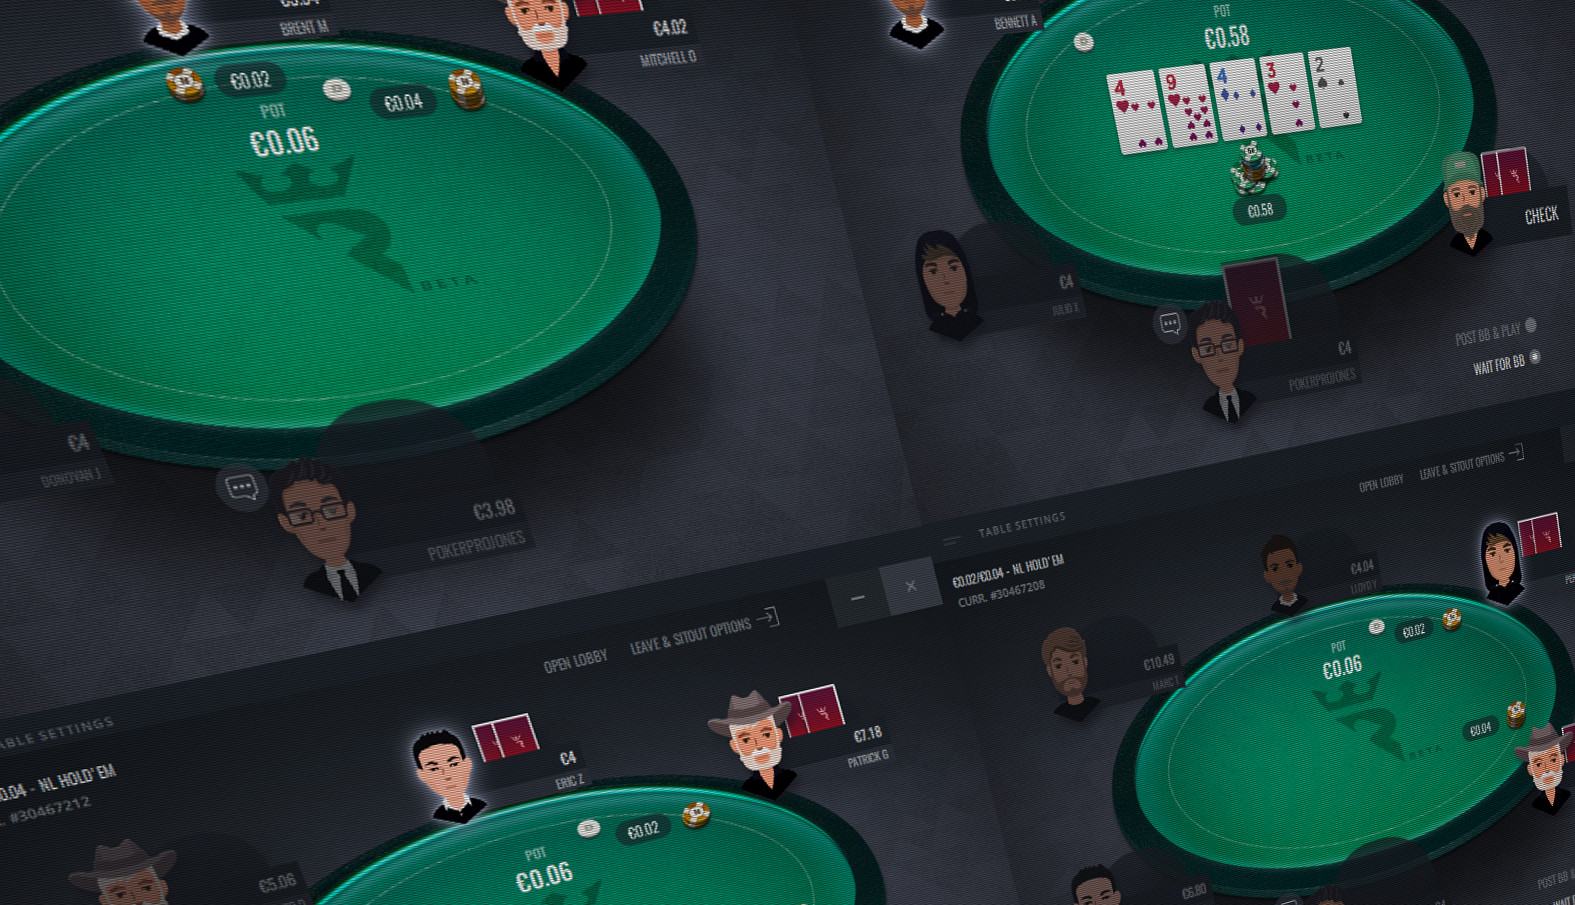 What makes a good poker website to stand out from the crowd?